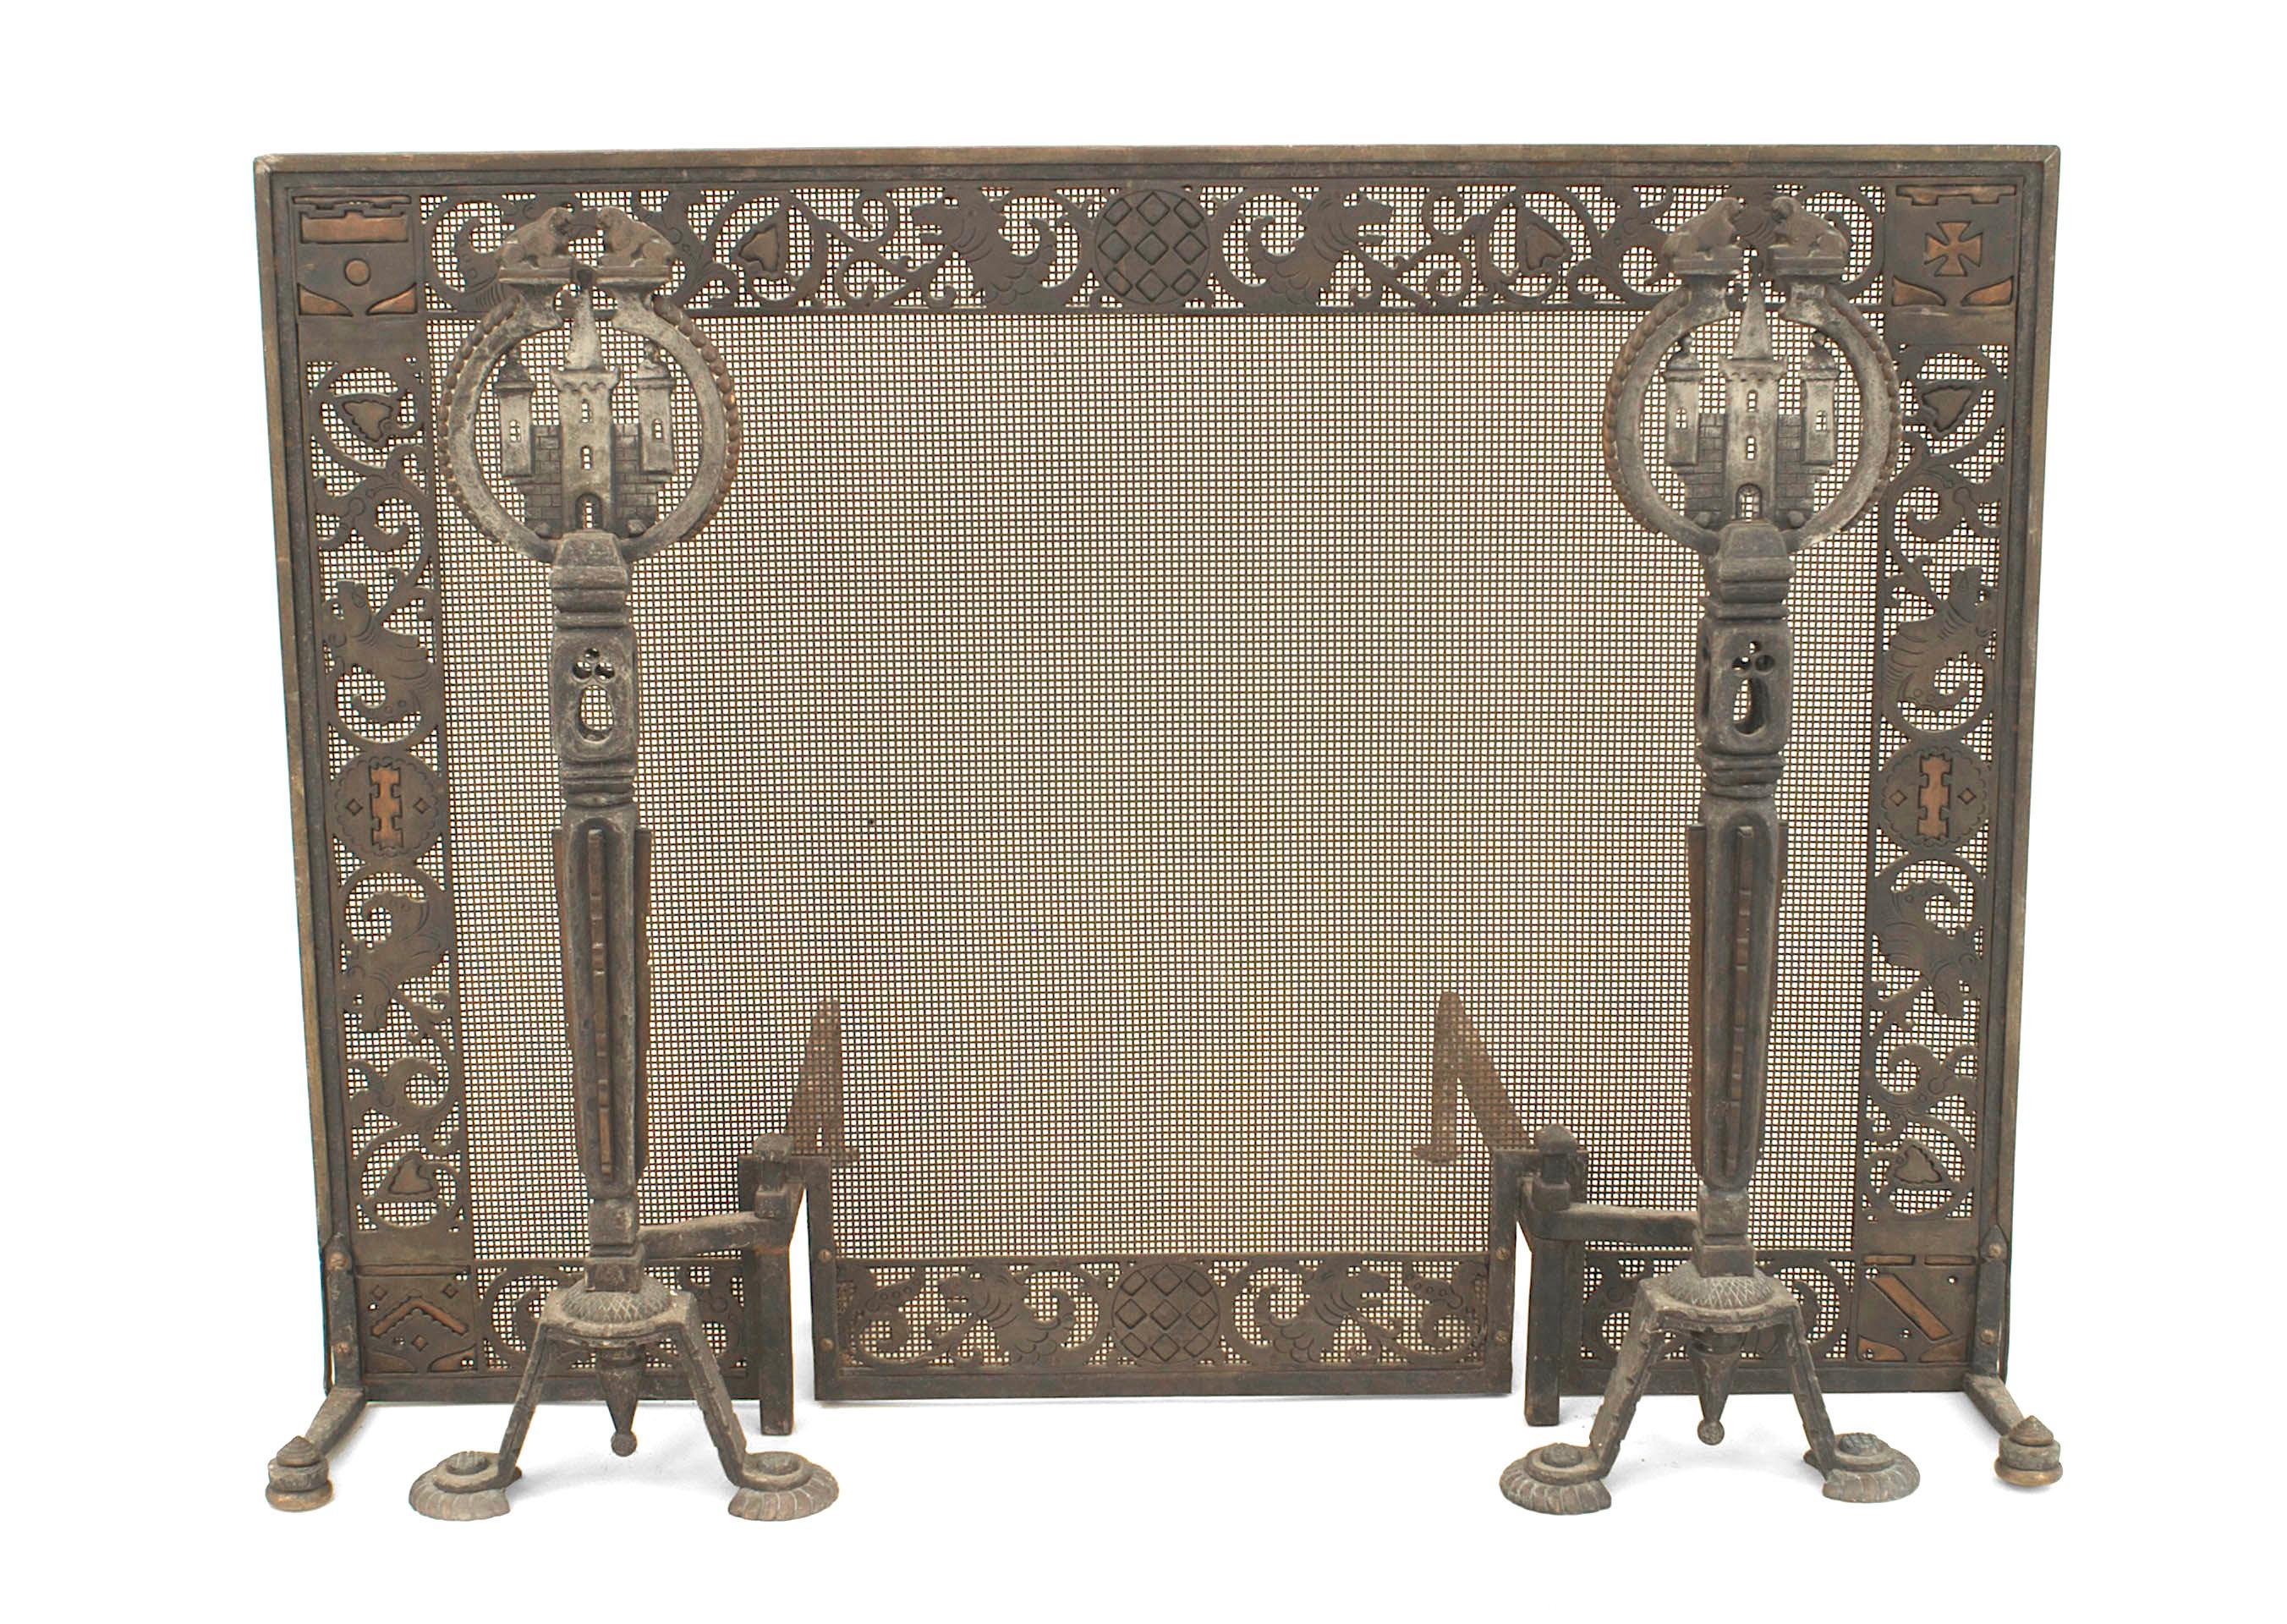 American Arts and Crafts wrought iron and bronze fire place andirons and screen with castles and griffins.
